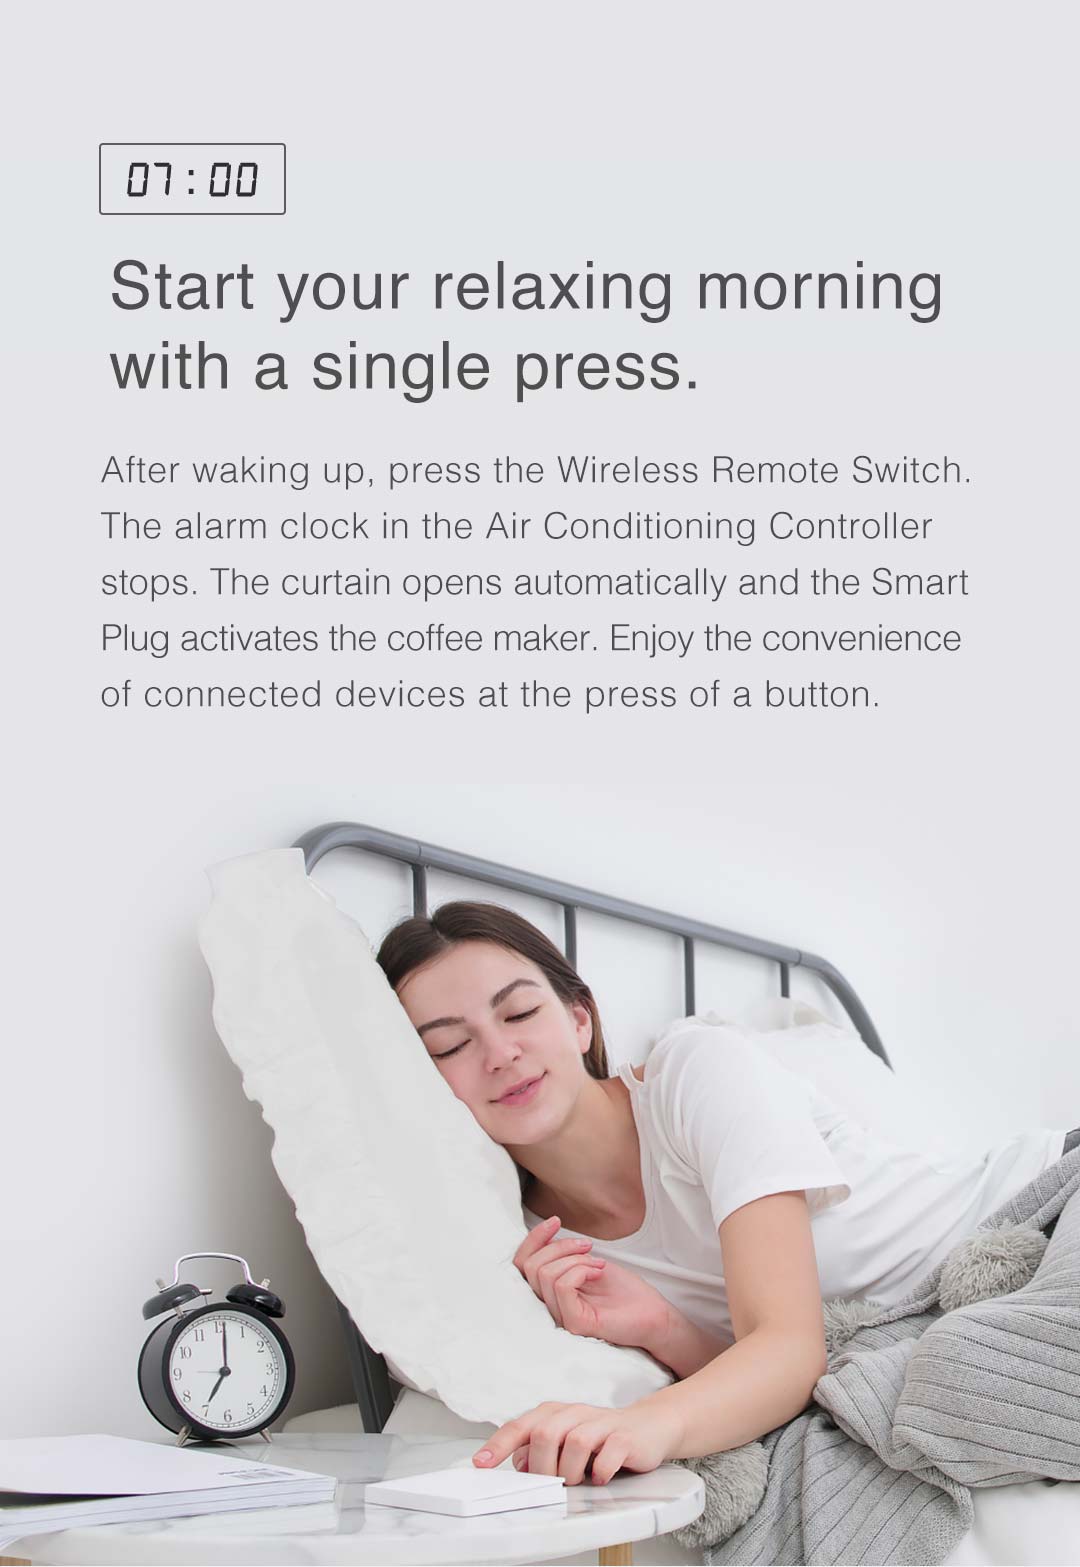 Press our wireless light switch to start your relaxing morning